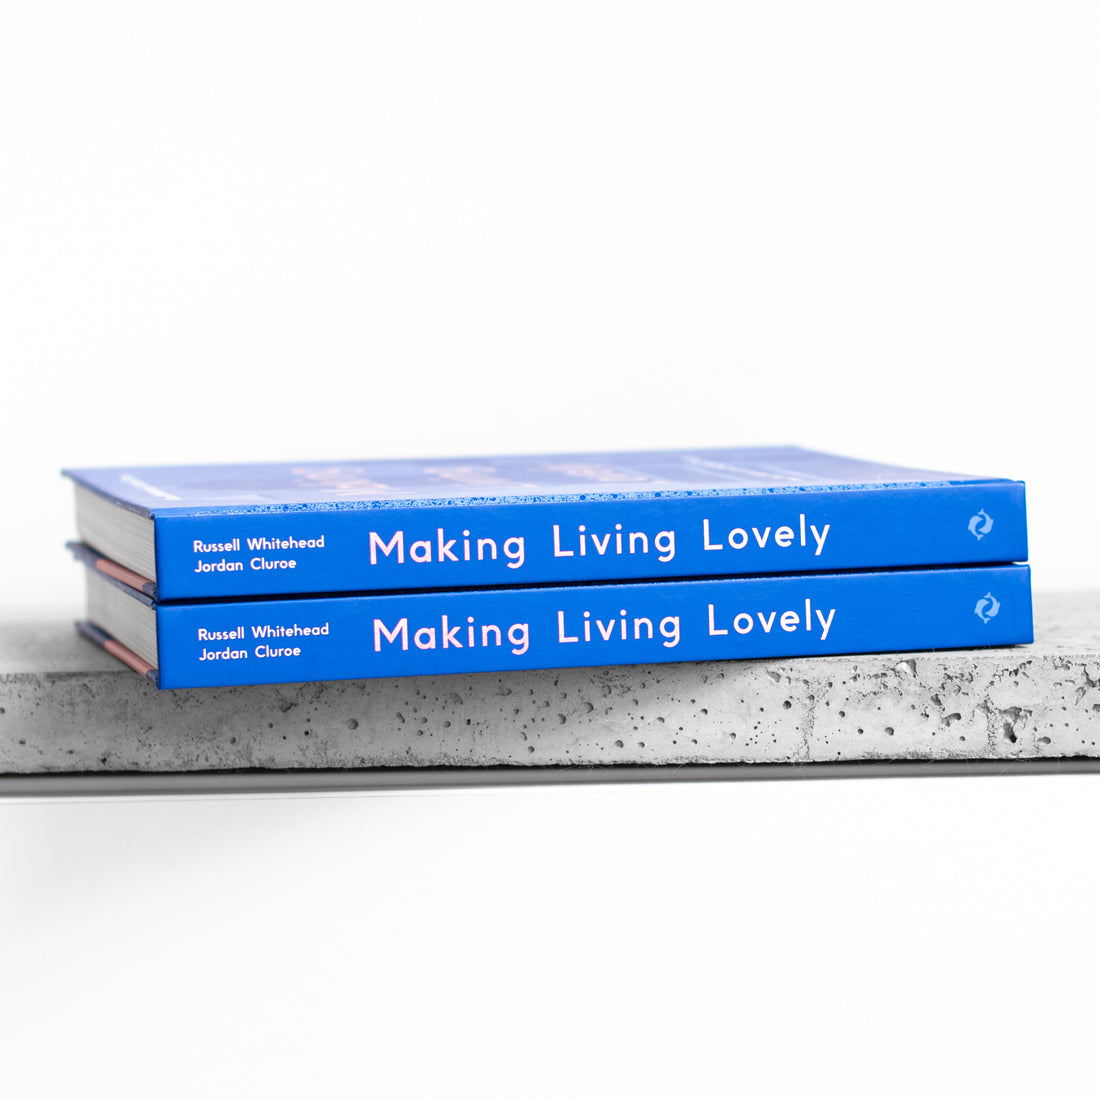 Making Living Lovely: Free Your Home with Creative Design